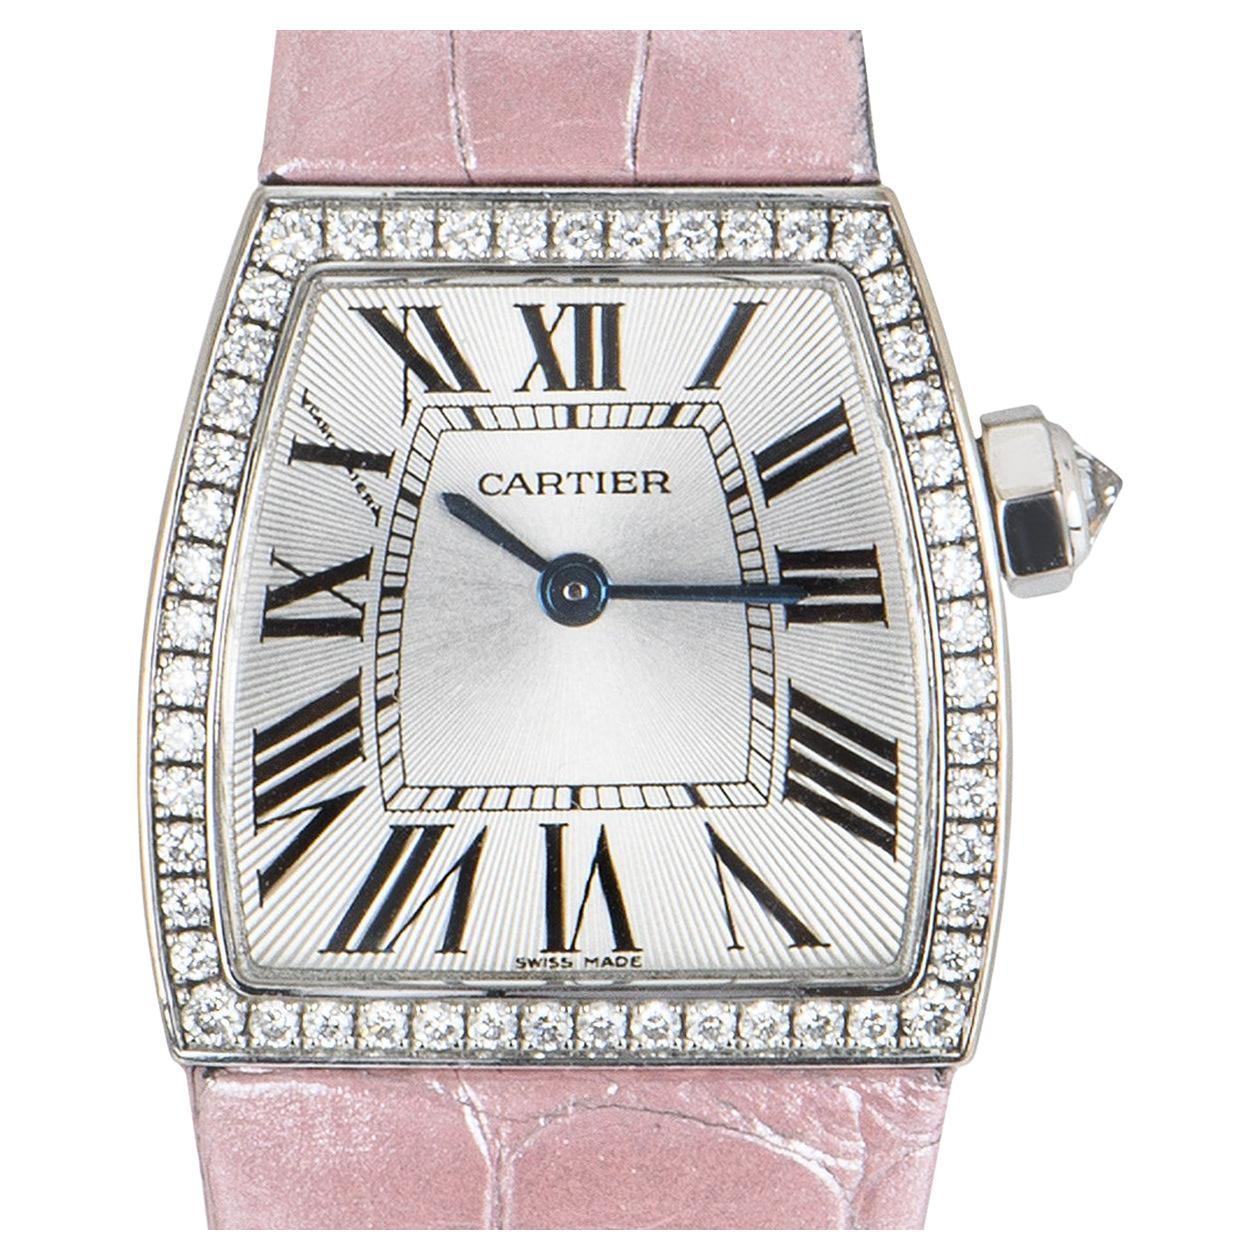 An 18k White Gold La Dona Ladies Wristwatch, silver guilloche dial with roman numerals and a secret signature at 'X', blued steel sword shaped hands, a fixed 18k white gold bezel set with approximately 51 round brilliant cut diamonds, an 18k white